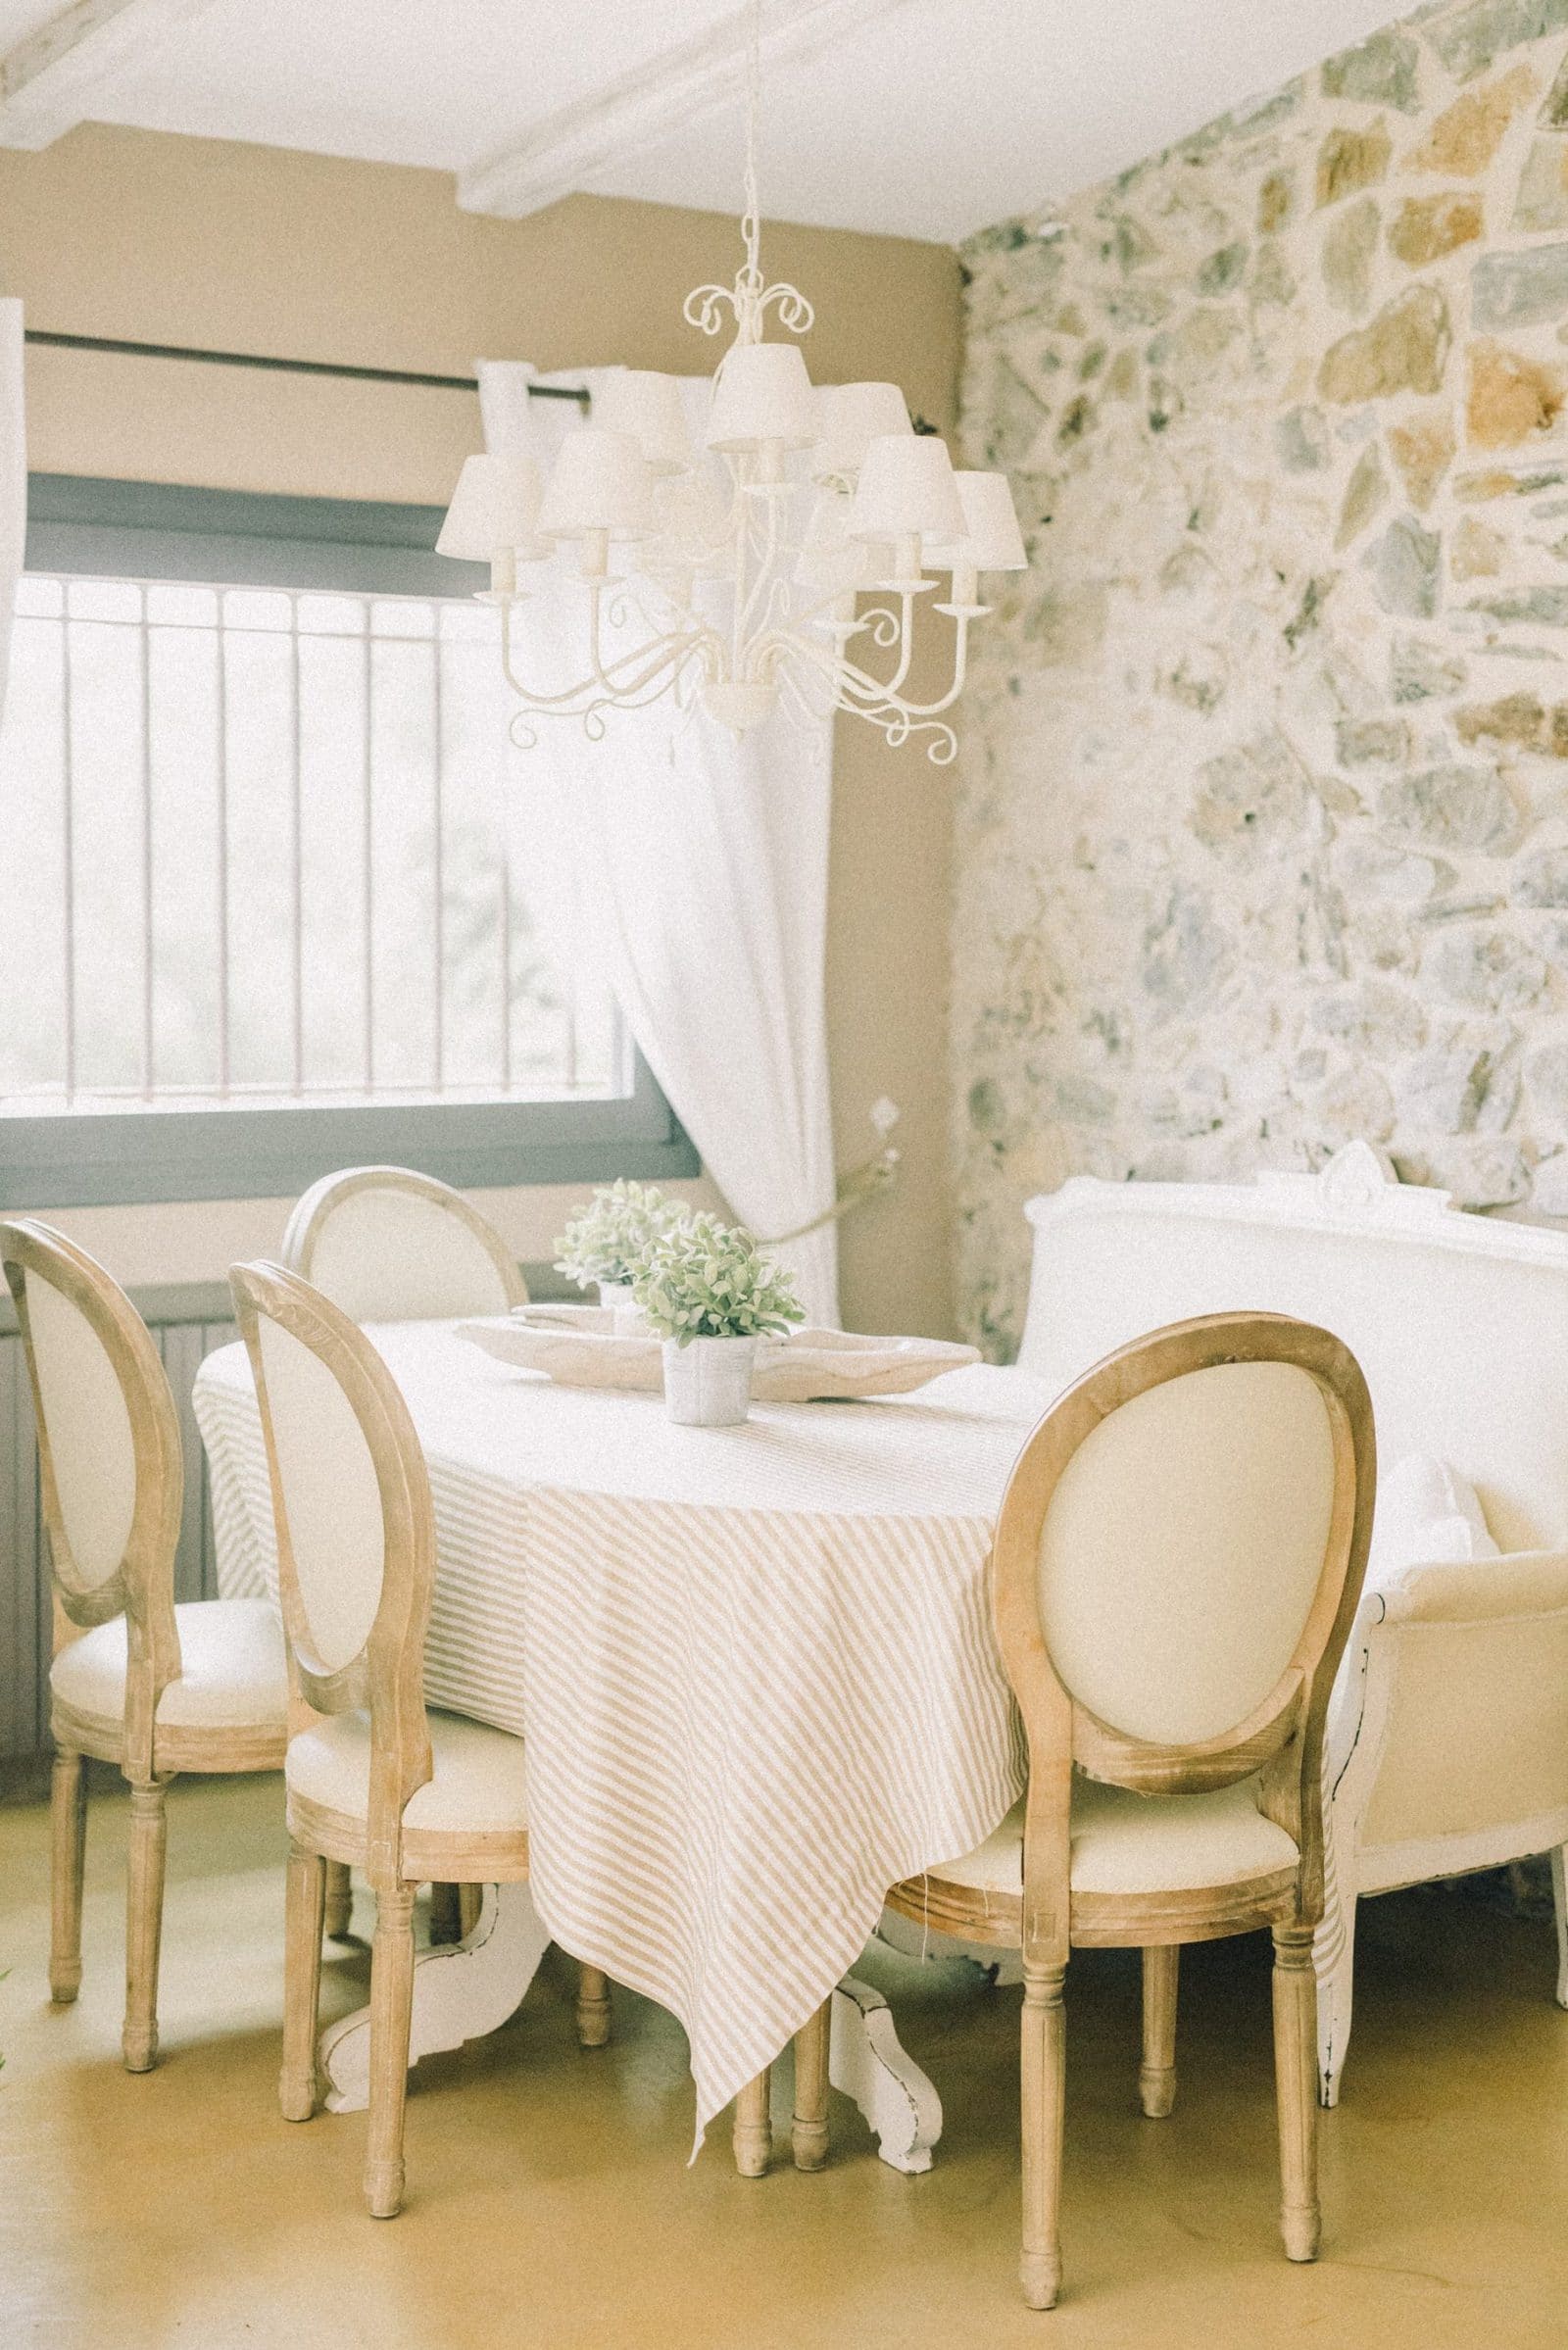 1. How High Should a Chandelier Be Above a Table scaled